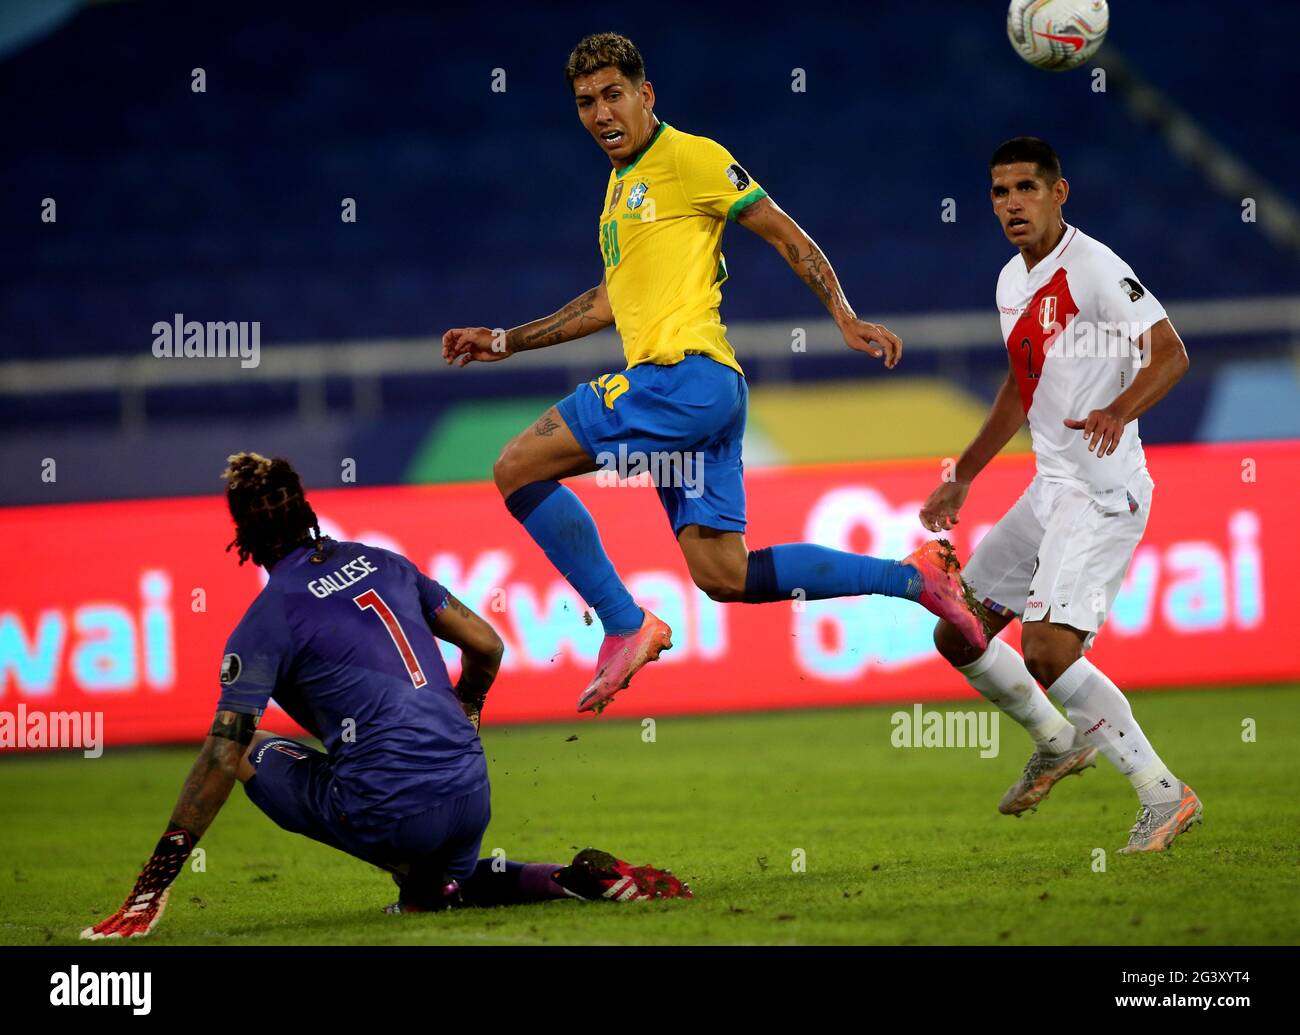 RIO DE JANEIRO, BRAZIL - JUNE 17: : Roberto Firmino of Brazil competes for the ball with Luis Abram and Pedro Gallese of Peru ,during the match between Brazil and Peru as part of Conmebol Copa America Brazil 2021 at Estadio Olímpico Nilton Santos on June 17, 2021 in Rio de Janeiro, Brazil. (Photo by MB Media) Stock Photo